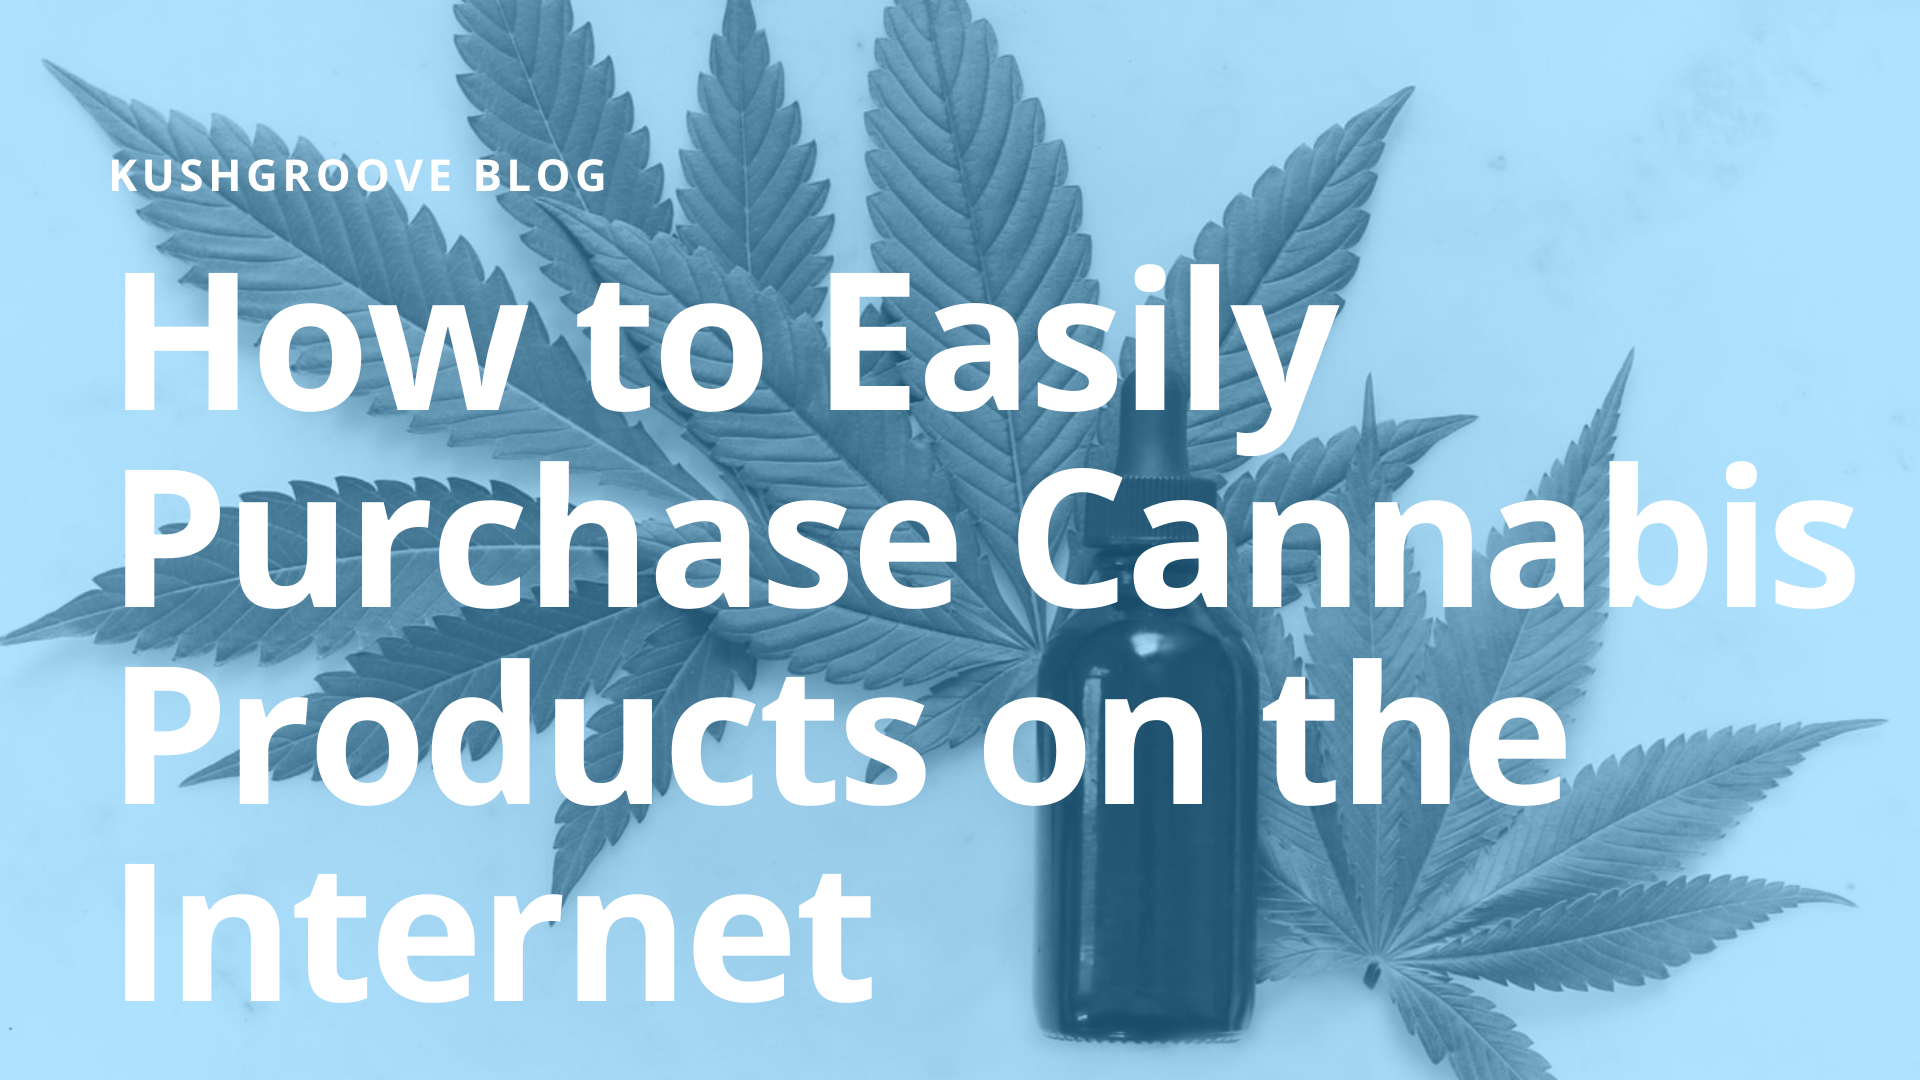 How to Easily Purchase Cannabis Products on the Internet